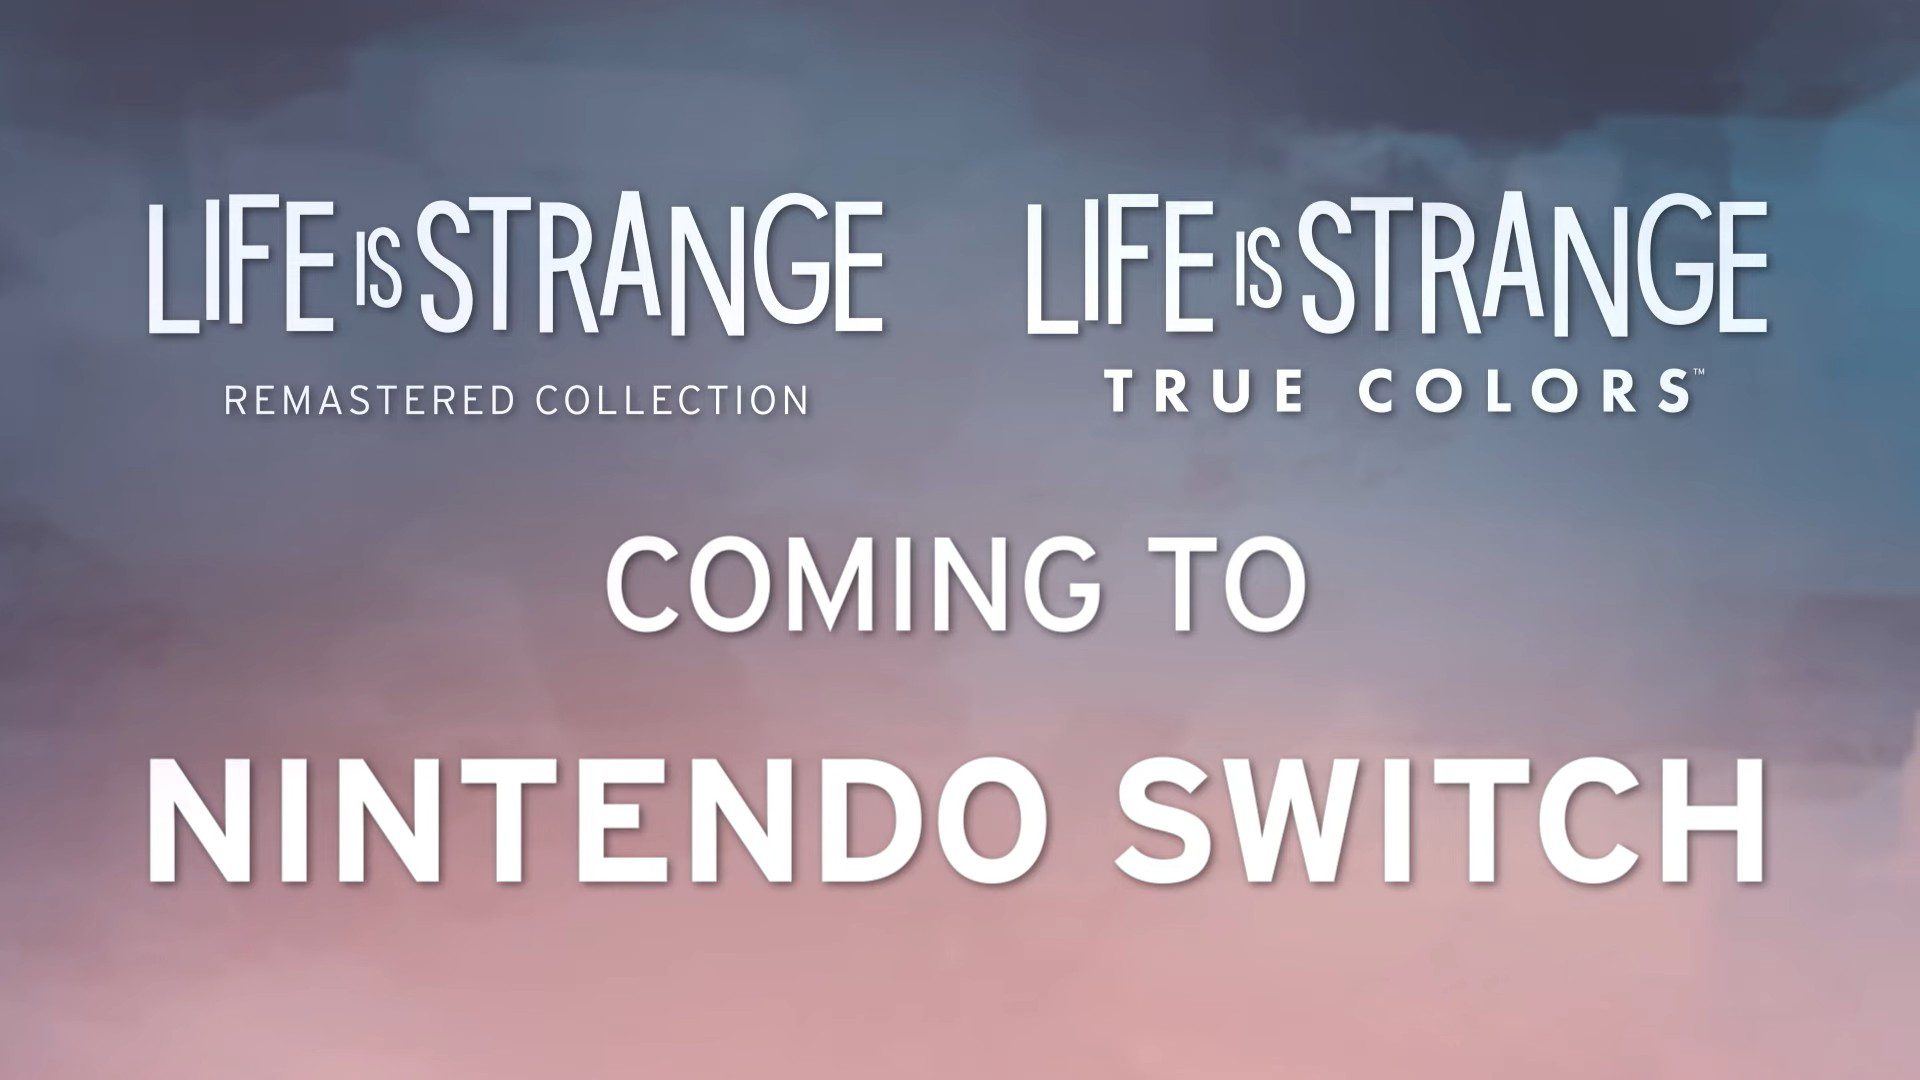 life is strange remastered collection i life is strange true colors na nintendo switch